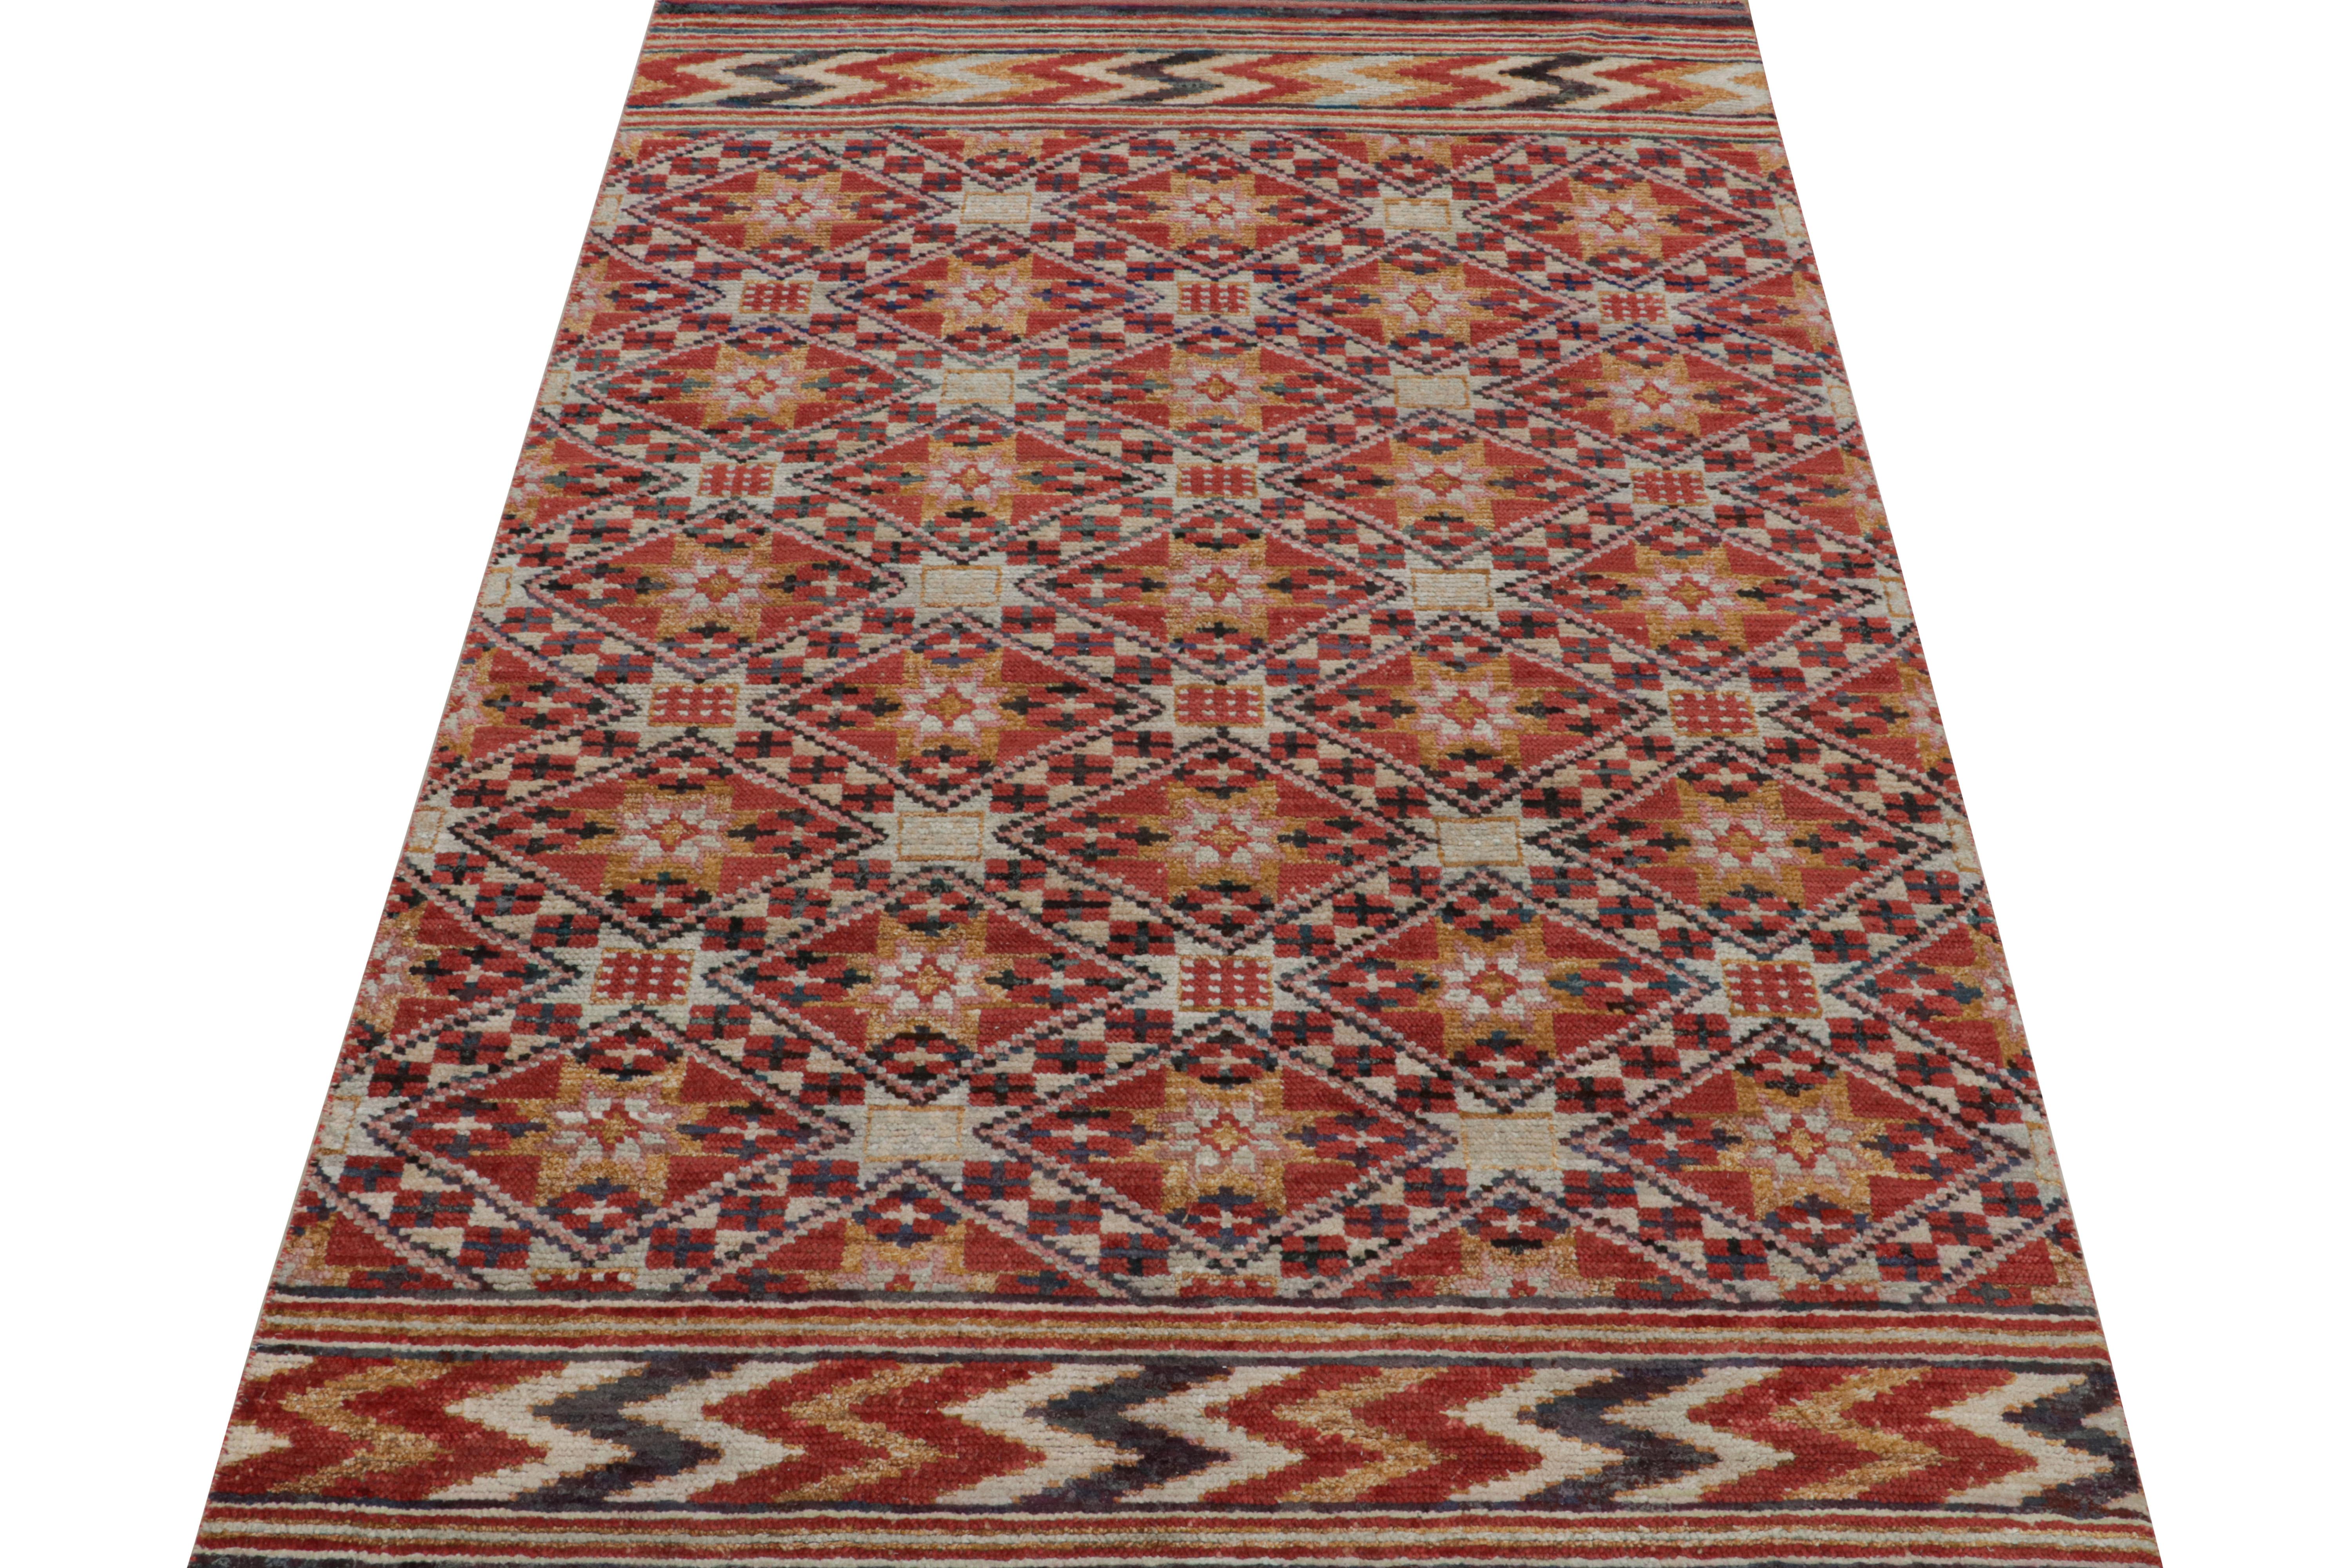 Tribal Rug & Kilim’s Moroccan Style Rug in Red with Gold Geometric Patterns For Sale